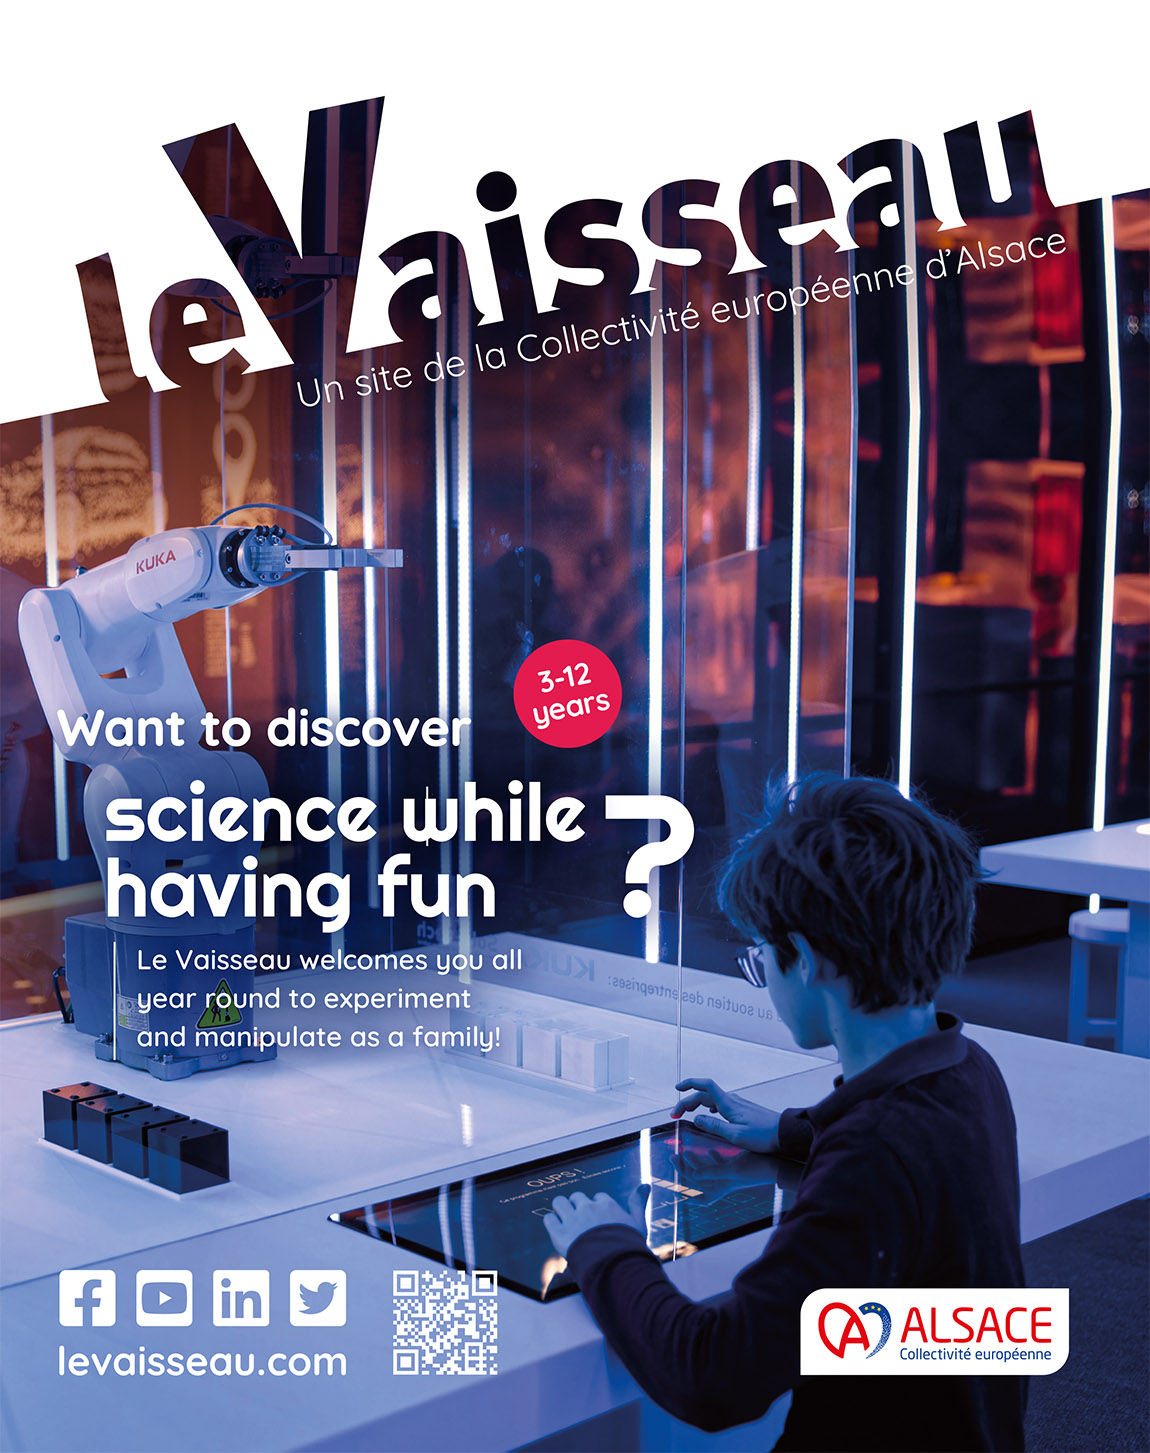 Le Vaisseau: Hands-on science equals lots of fun